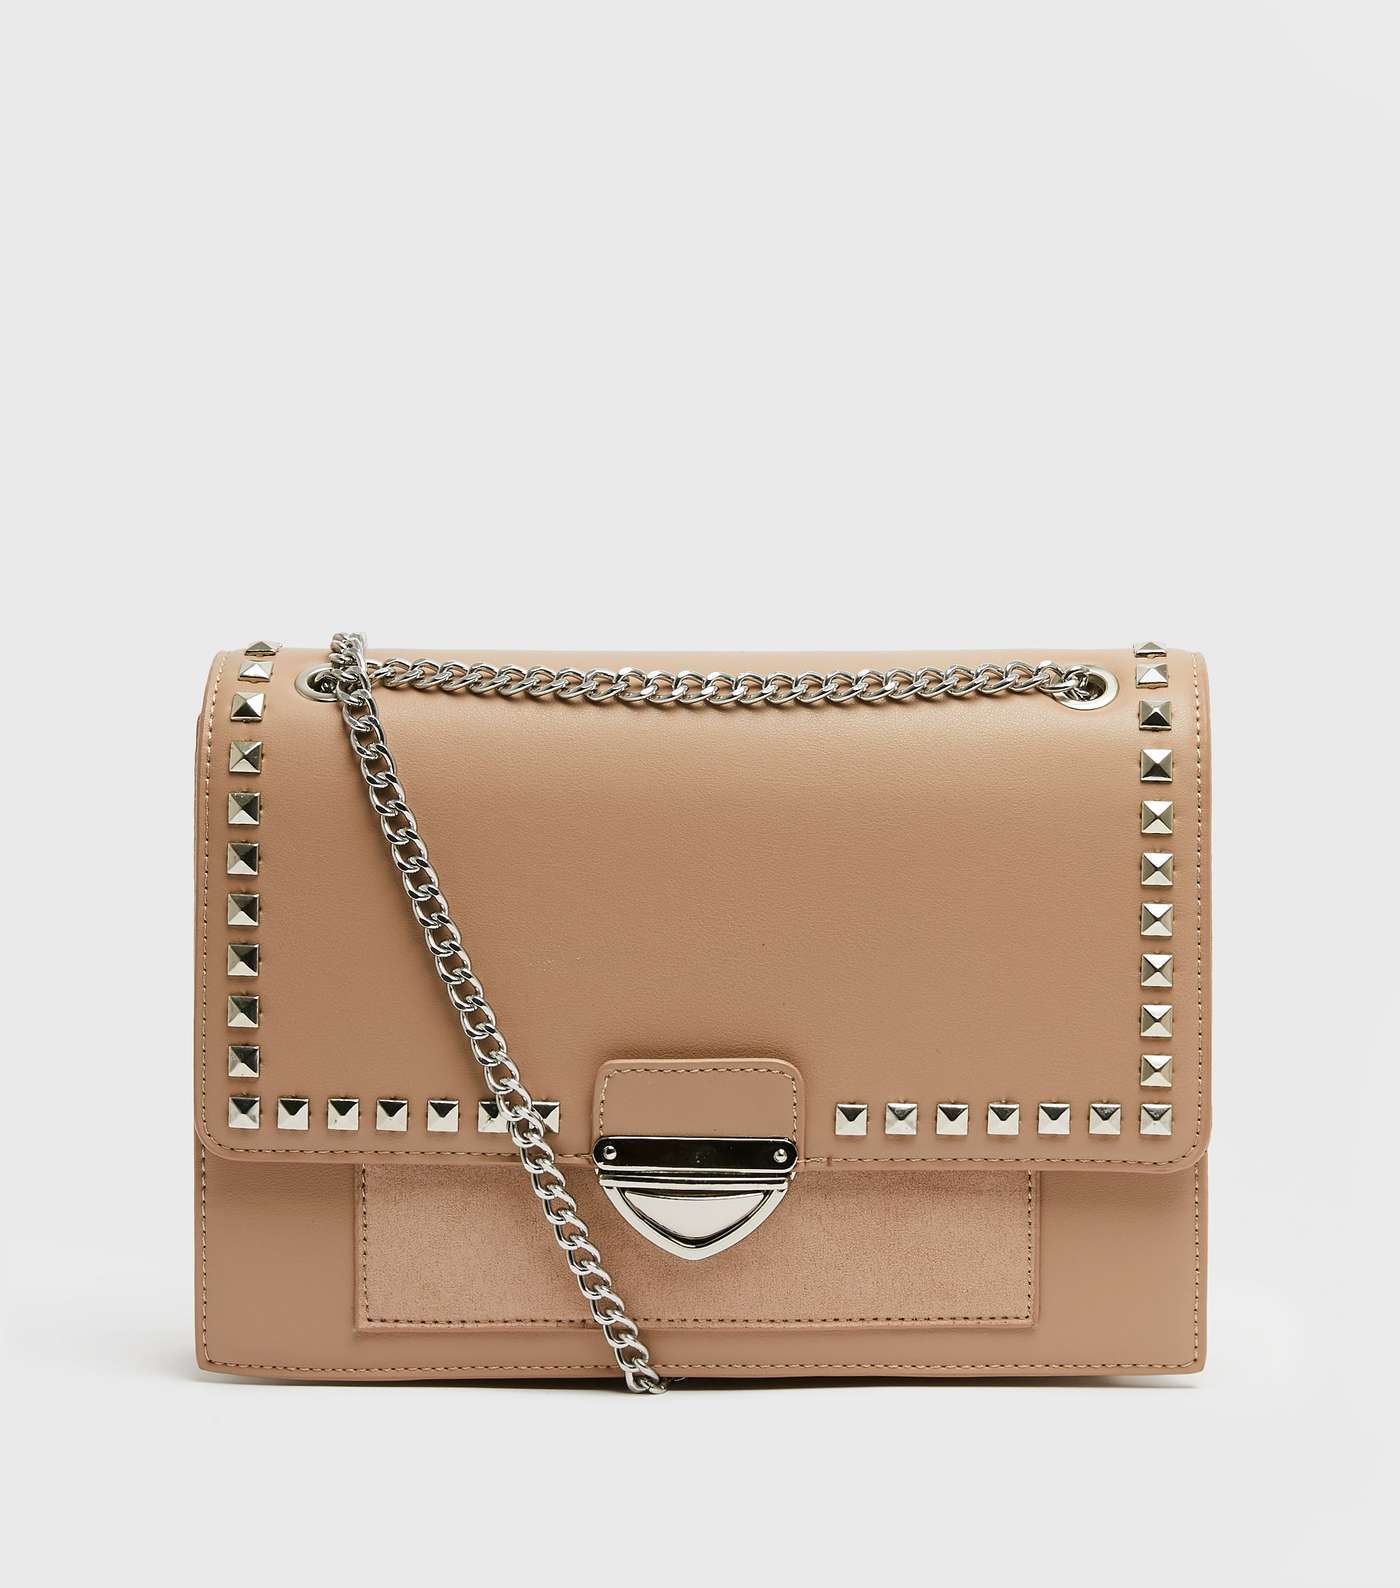 Tan Leather-Look Studded Chain Strap Bag